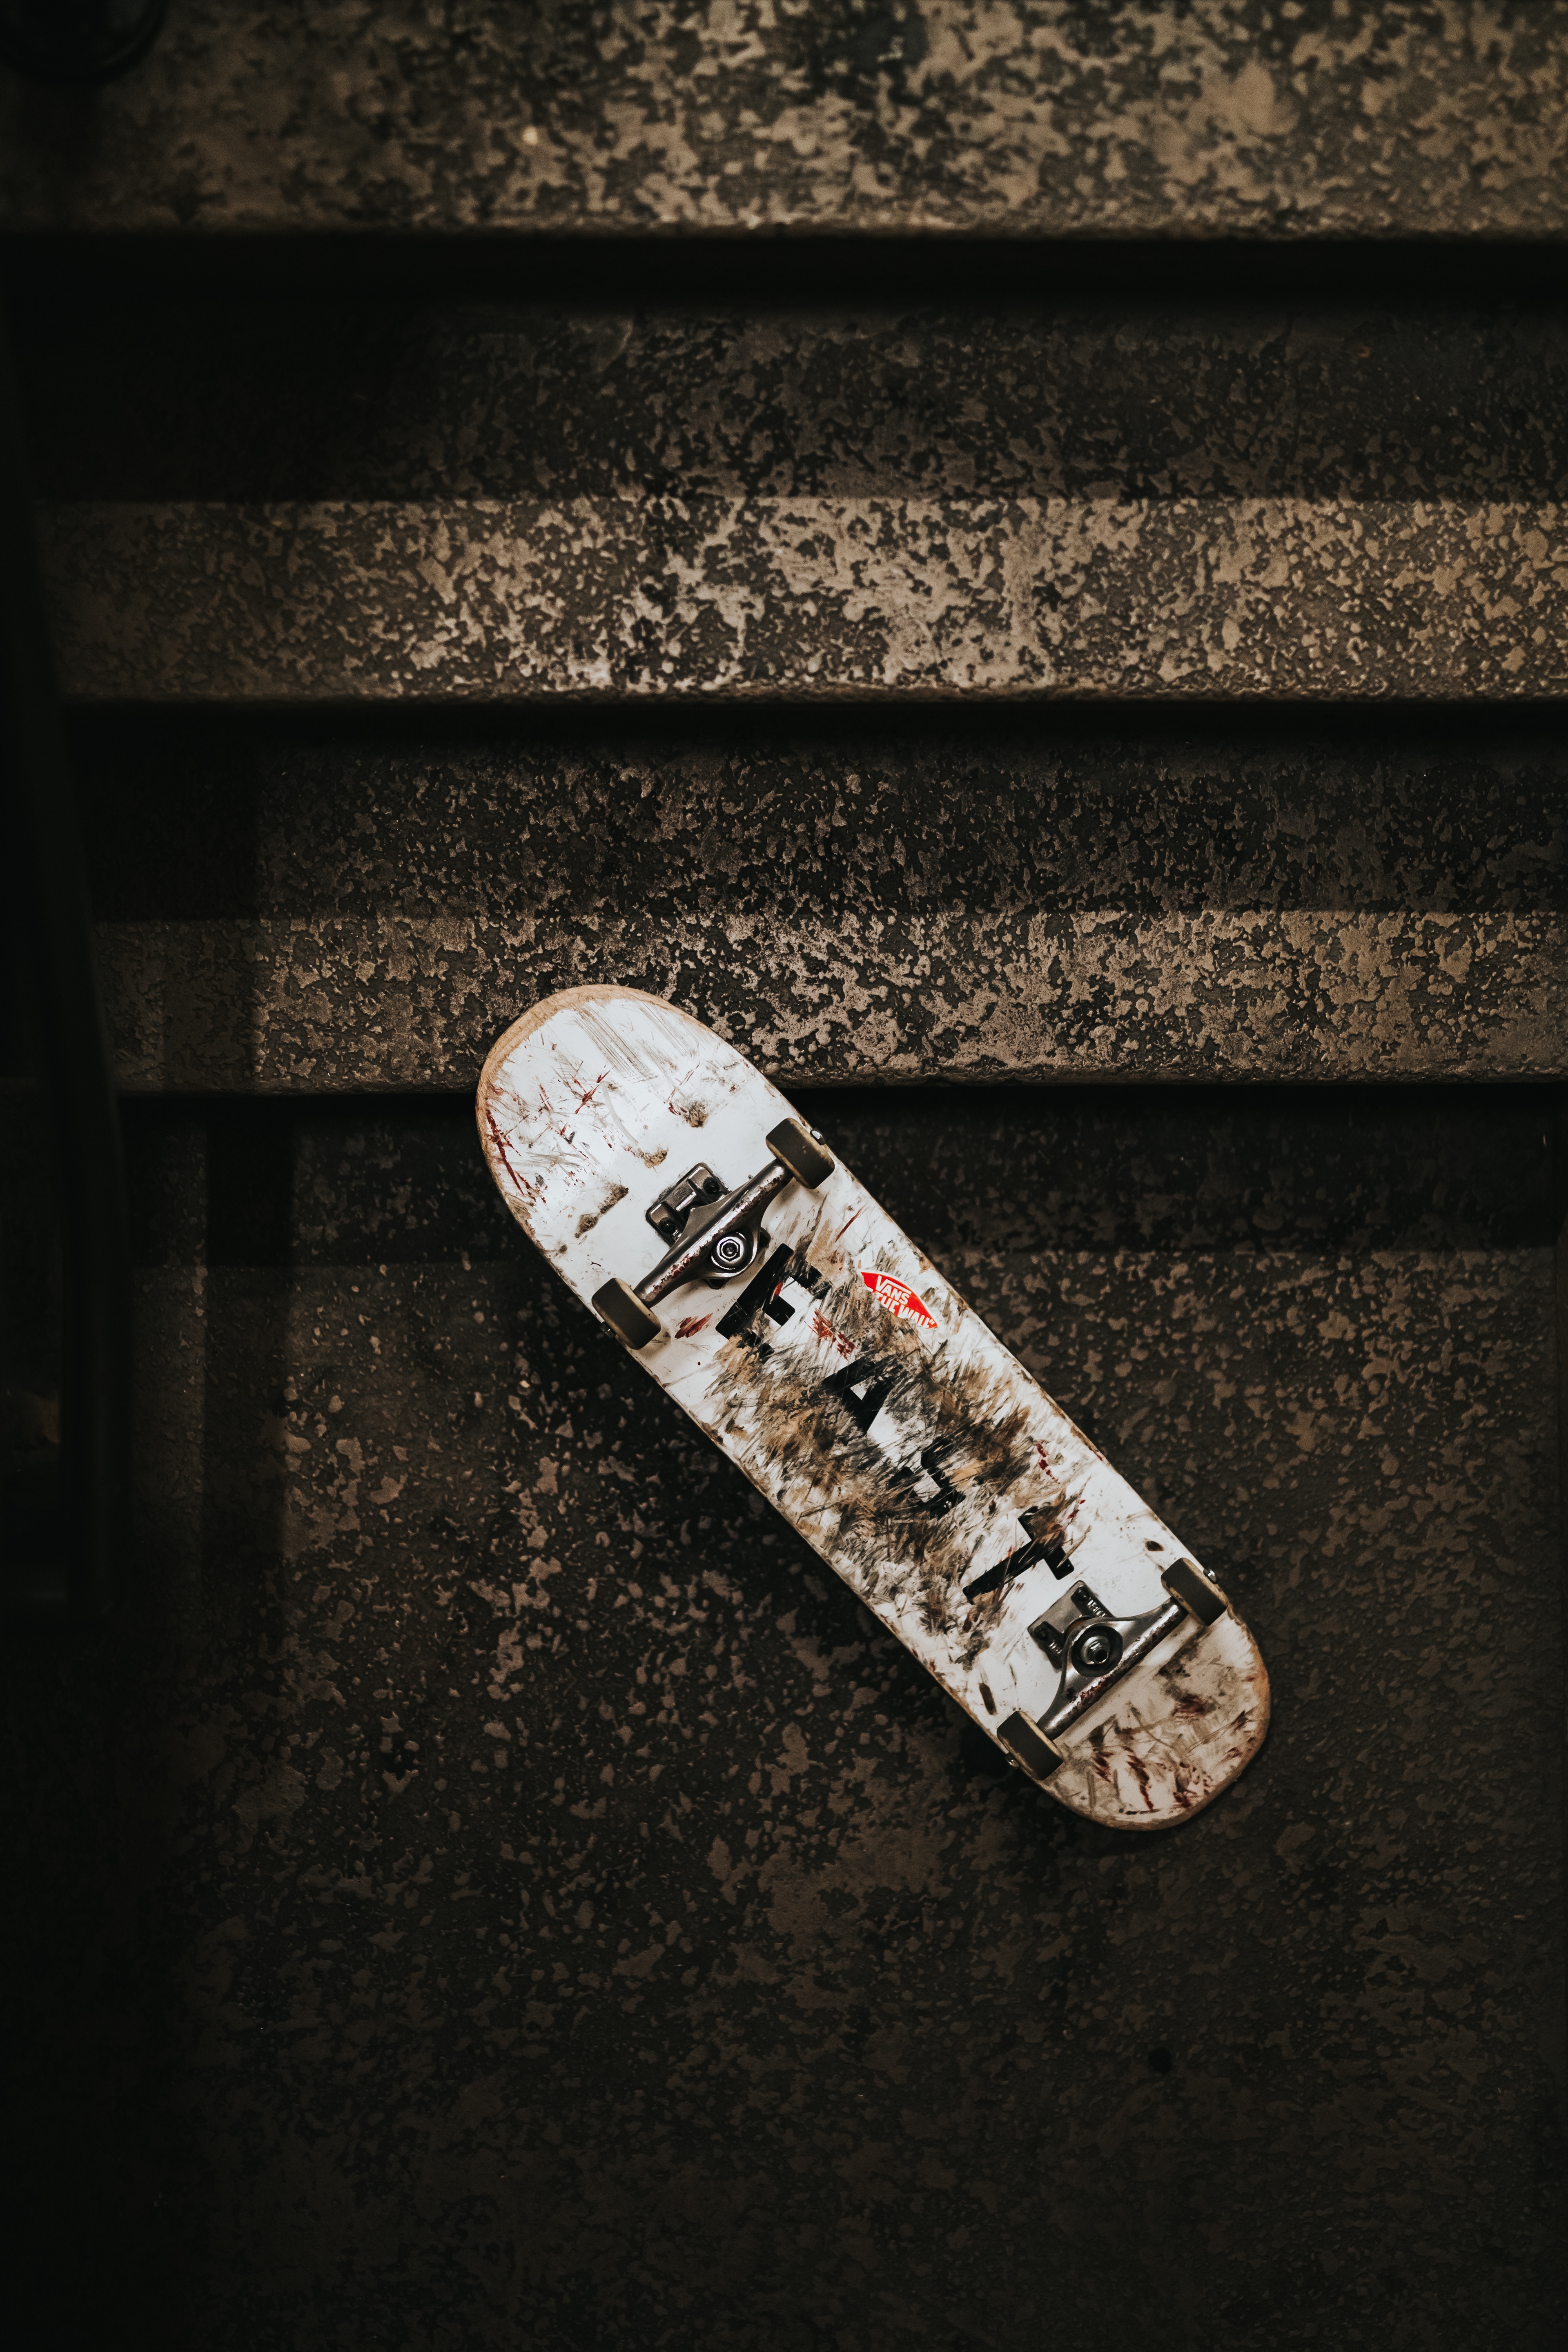 sports, lost, stairs, ladder, shabby, skateboard, wheels, dirty phone wallpaper